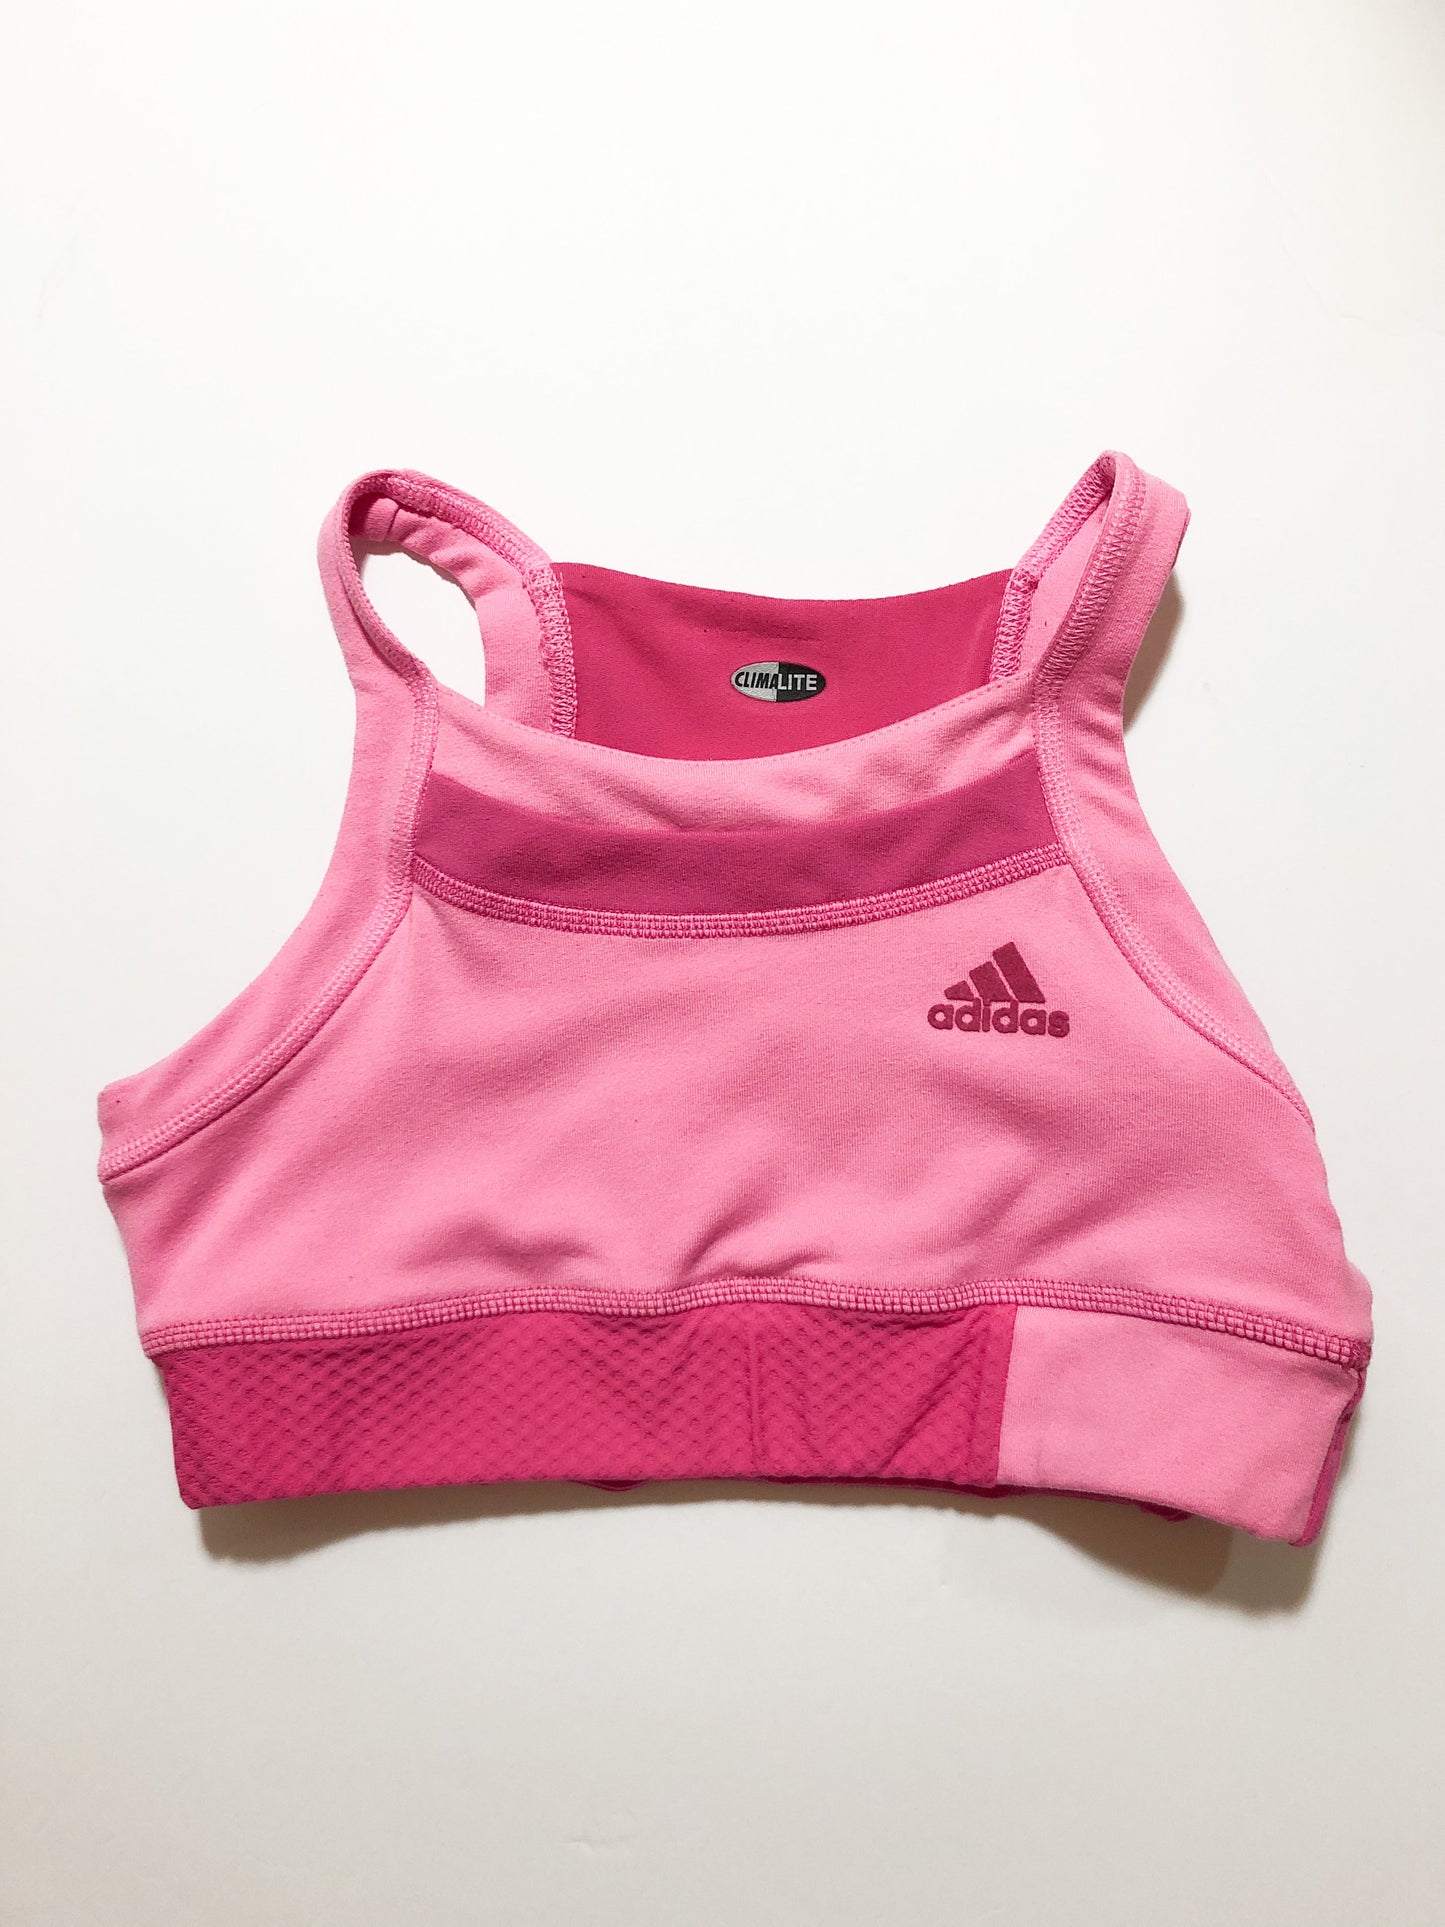 adidas Women's Ultimate Alpha High-Support Sports Bra pink Size XS MSRP $50